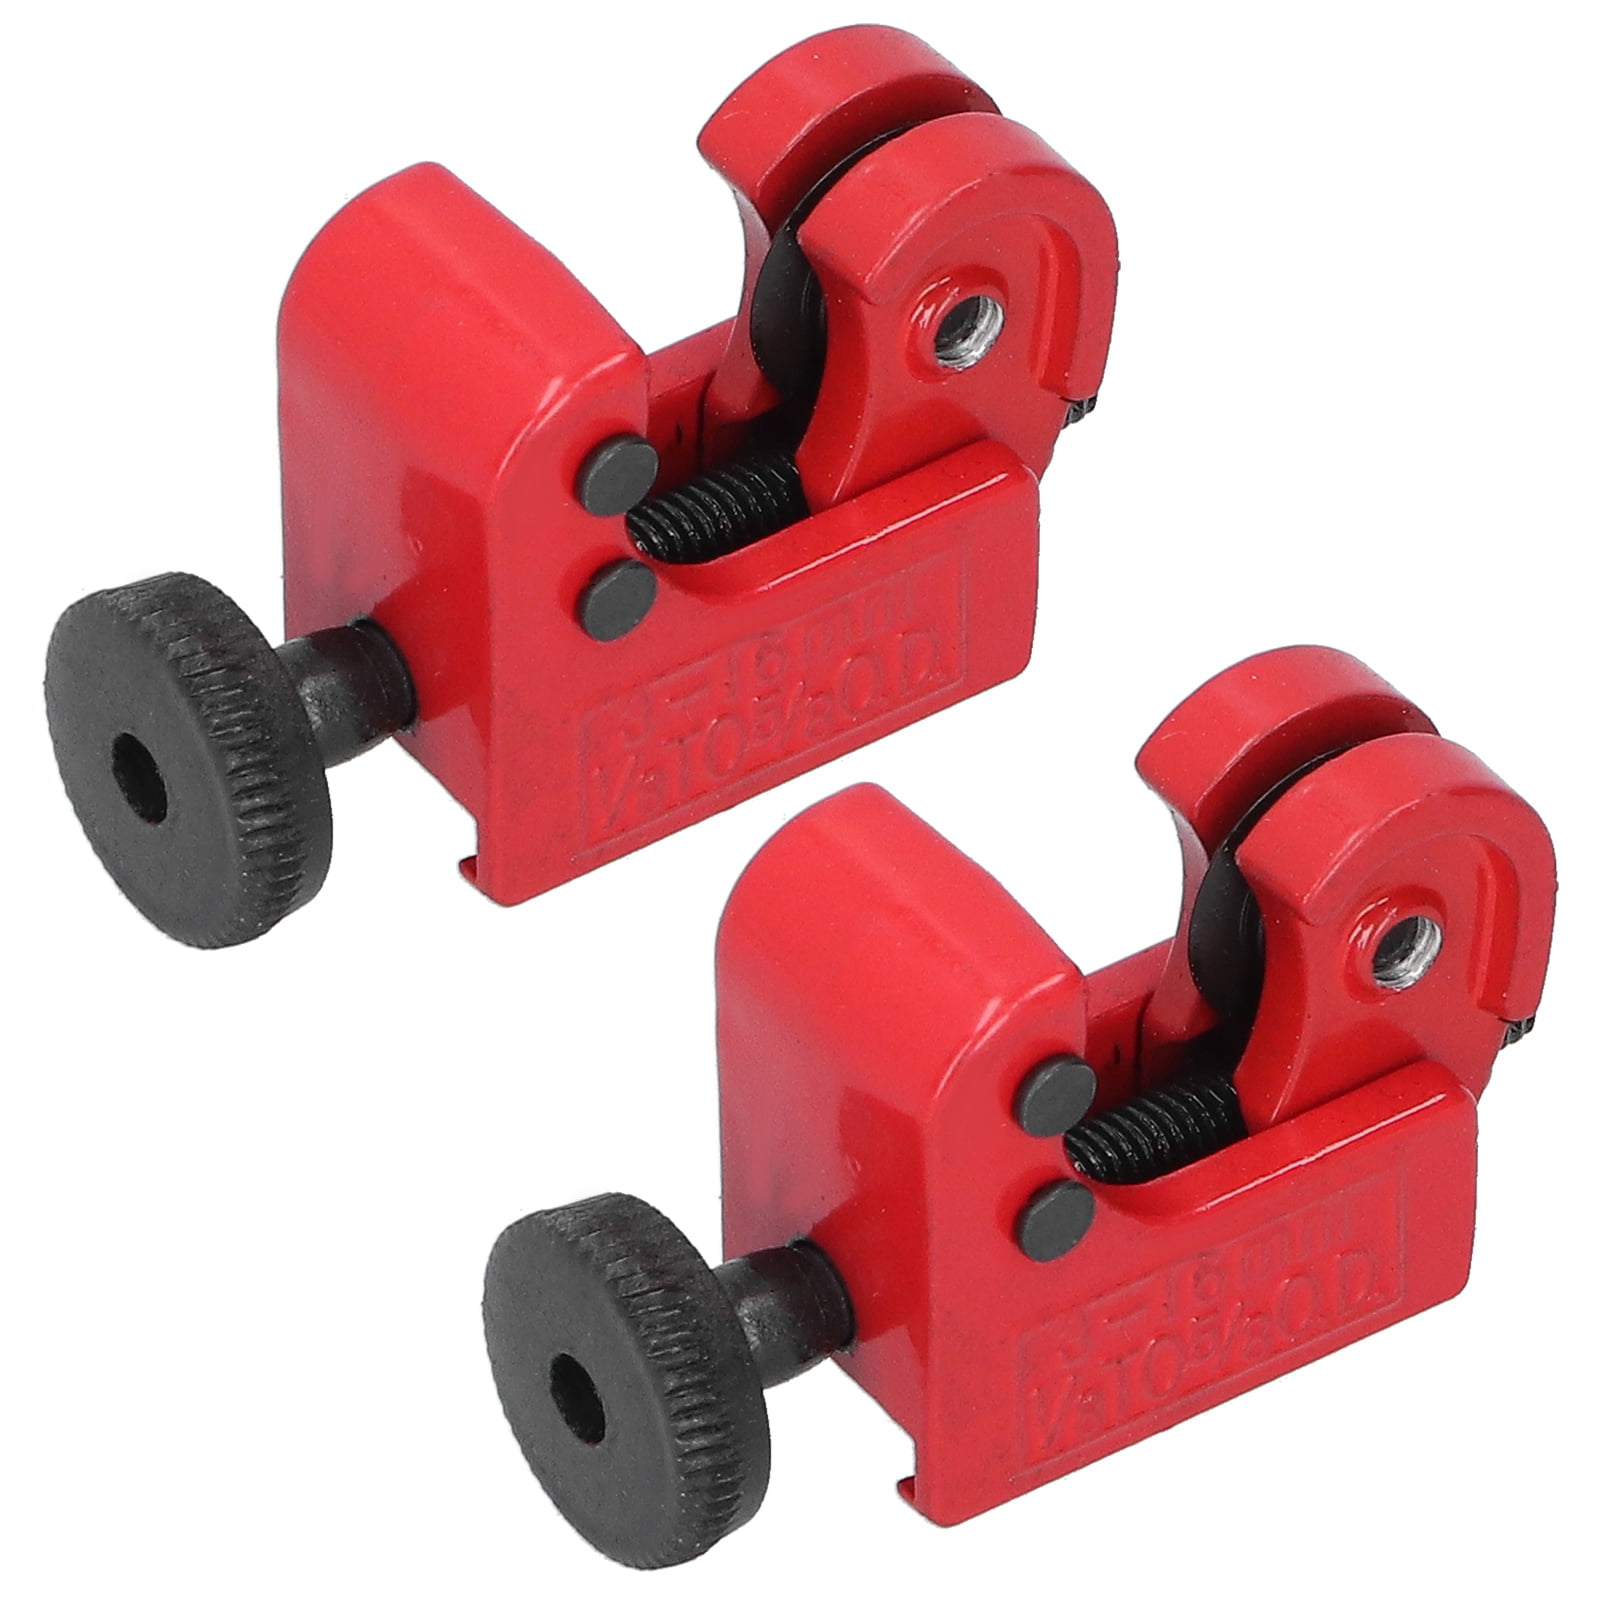 Mini Pipe Cutter Tube Cutter for Brake Fuel Line Tubing 3 to 16mm 